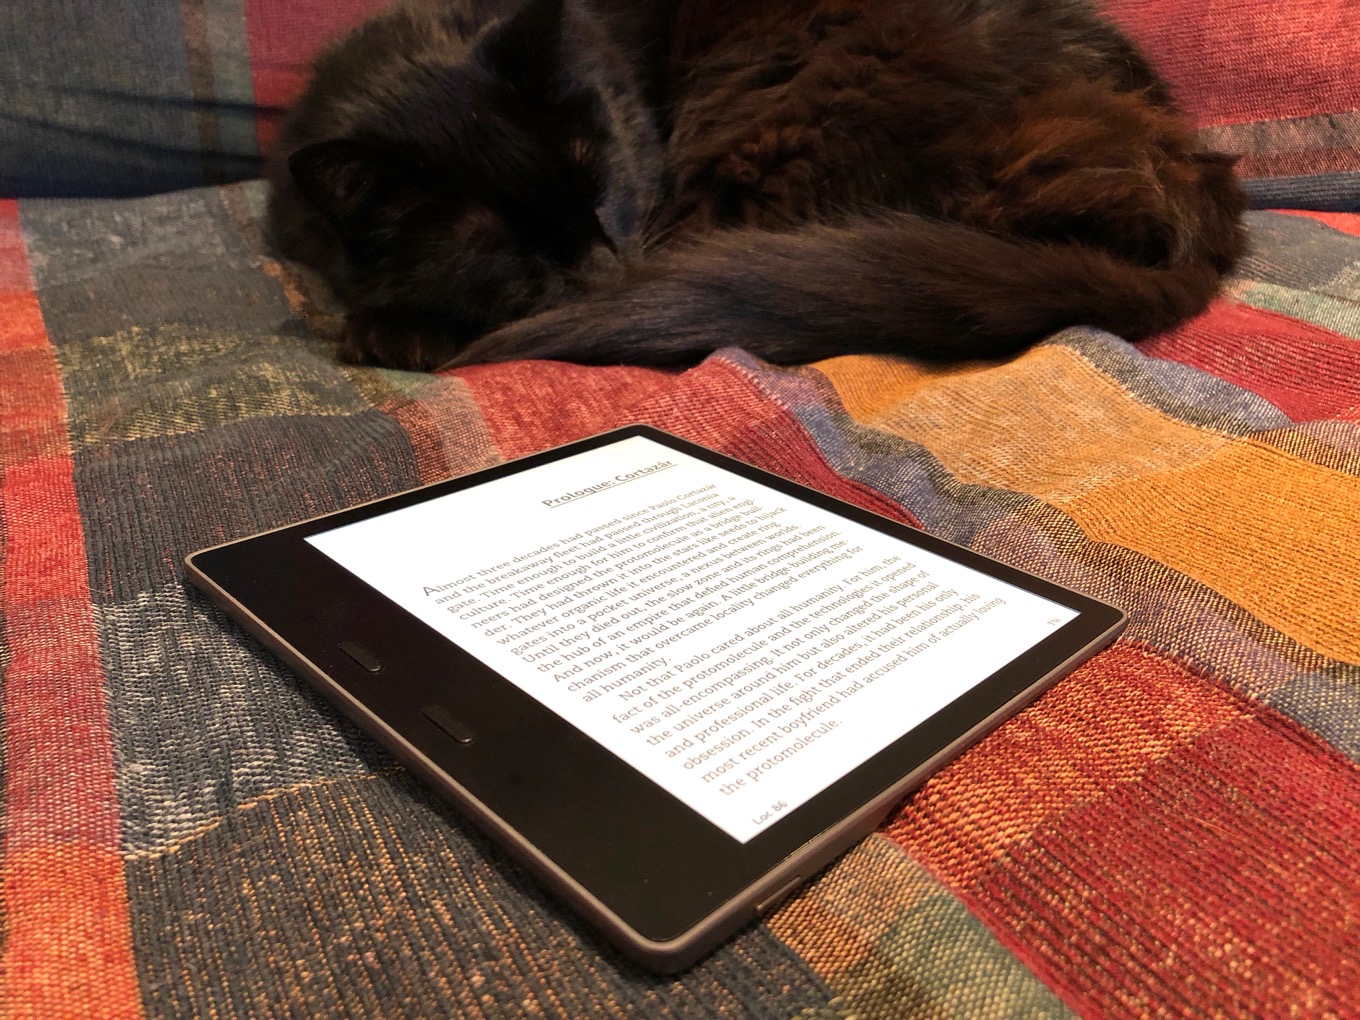 Kindle Paperwhite vs Kindle Oasis - which e-reader to buy